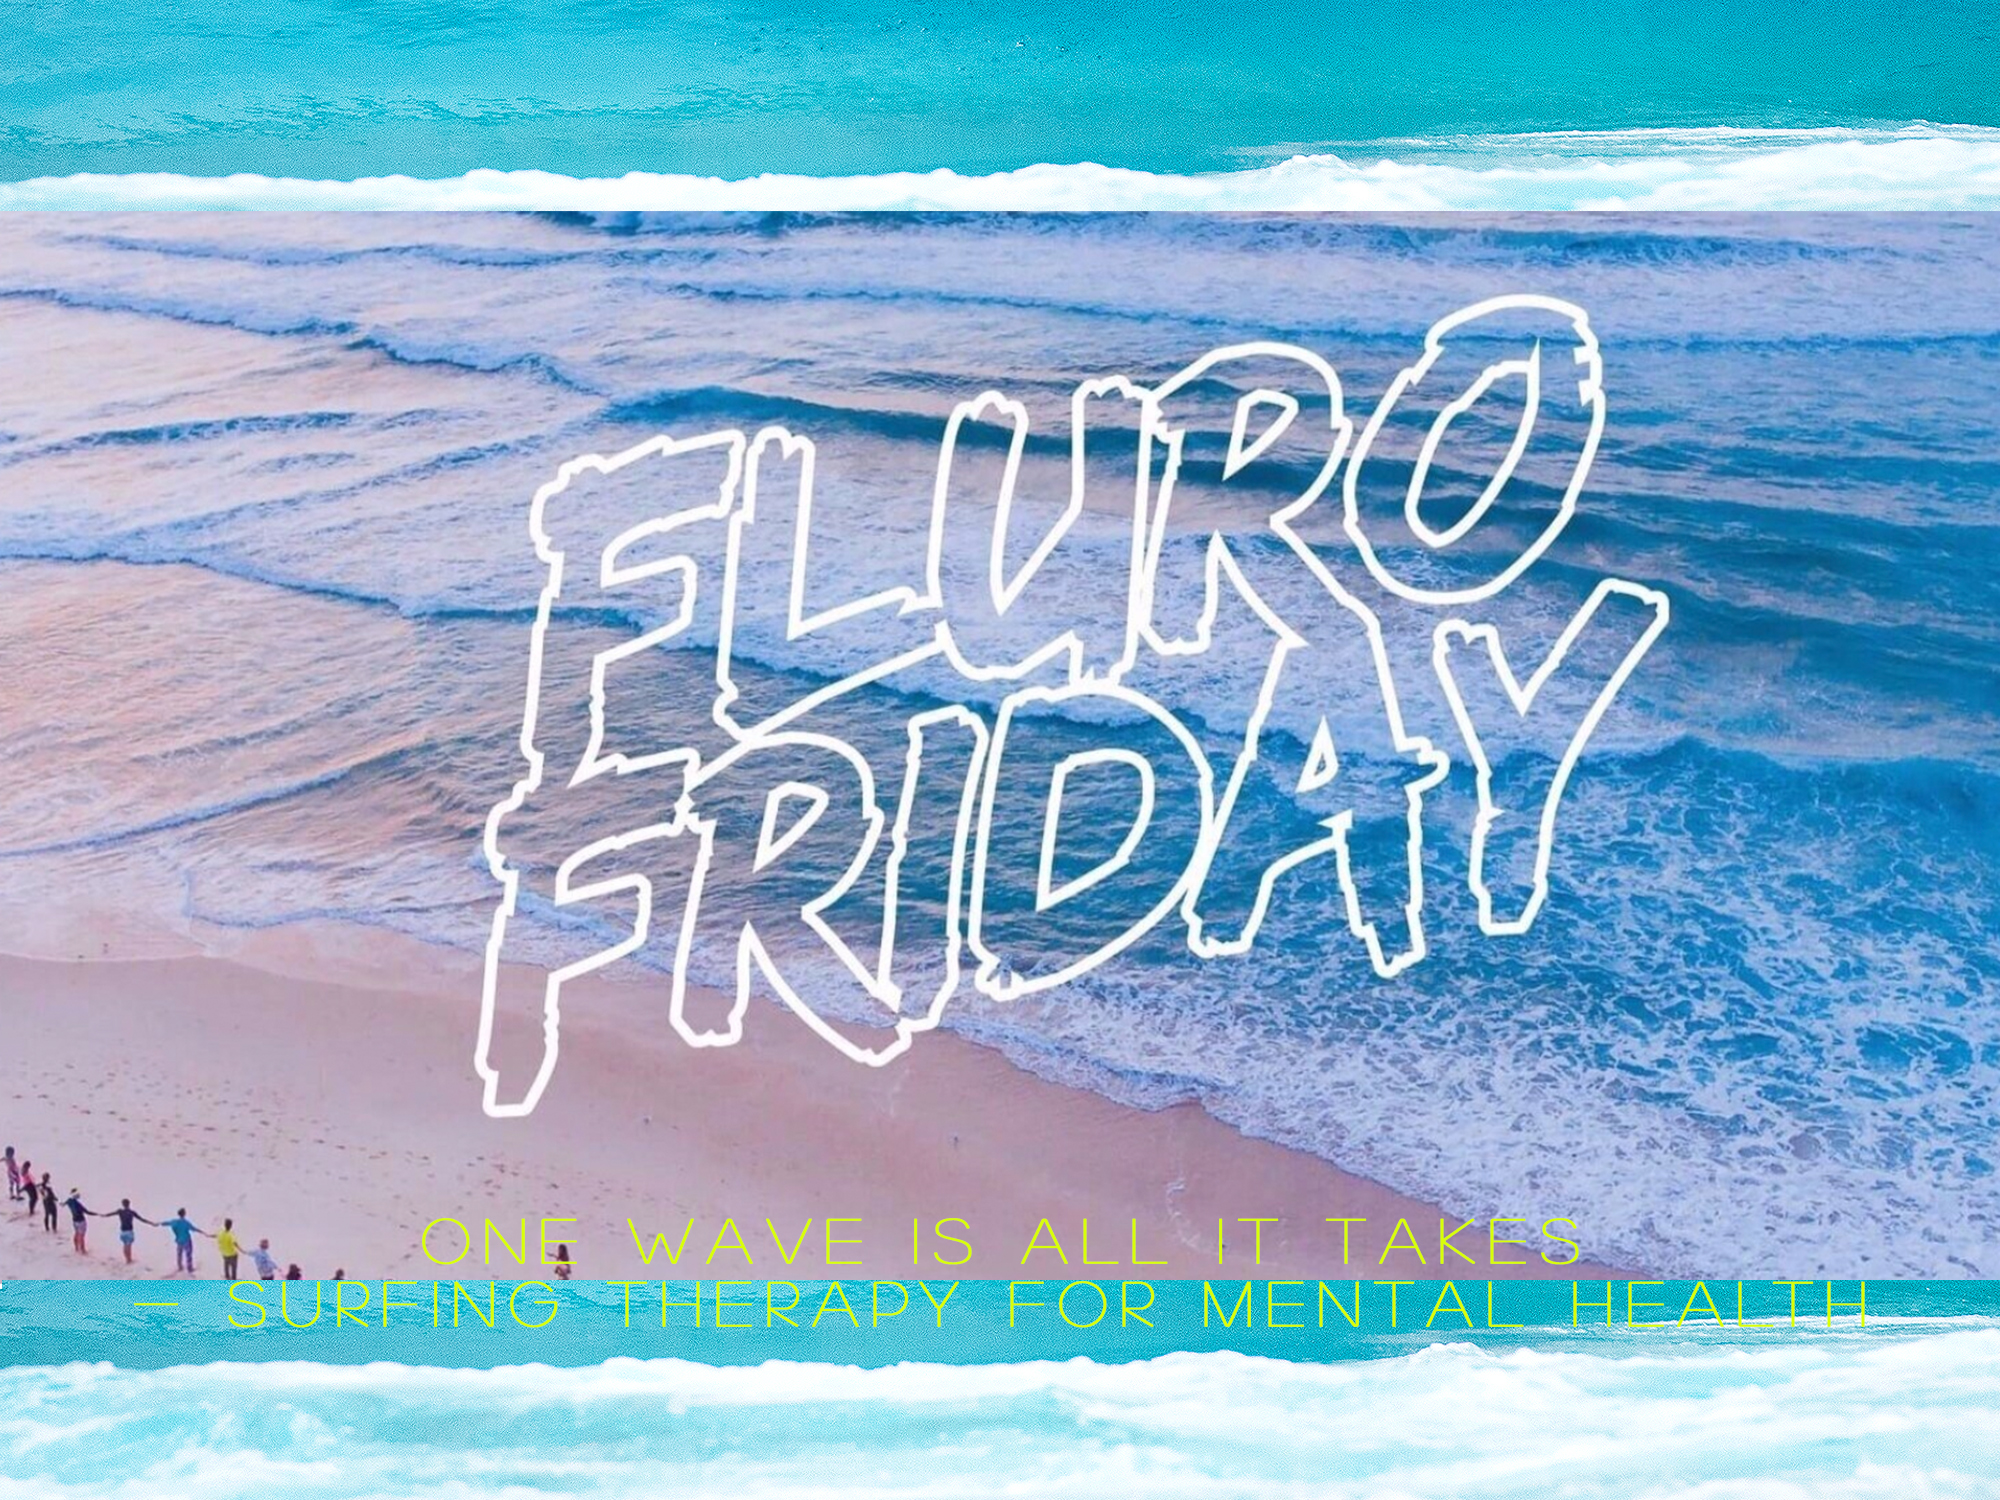 Euphoric Threads heads to Fluro Friday - One Wave is all it takes Surfing Therapy for Mental Health - Bondi Beach, Sydney